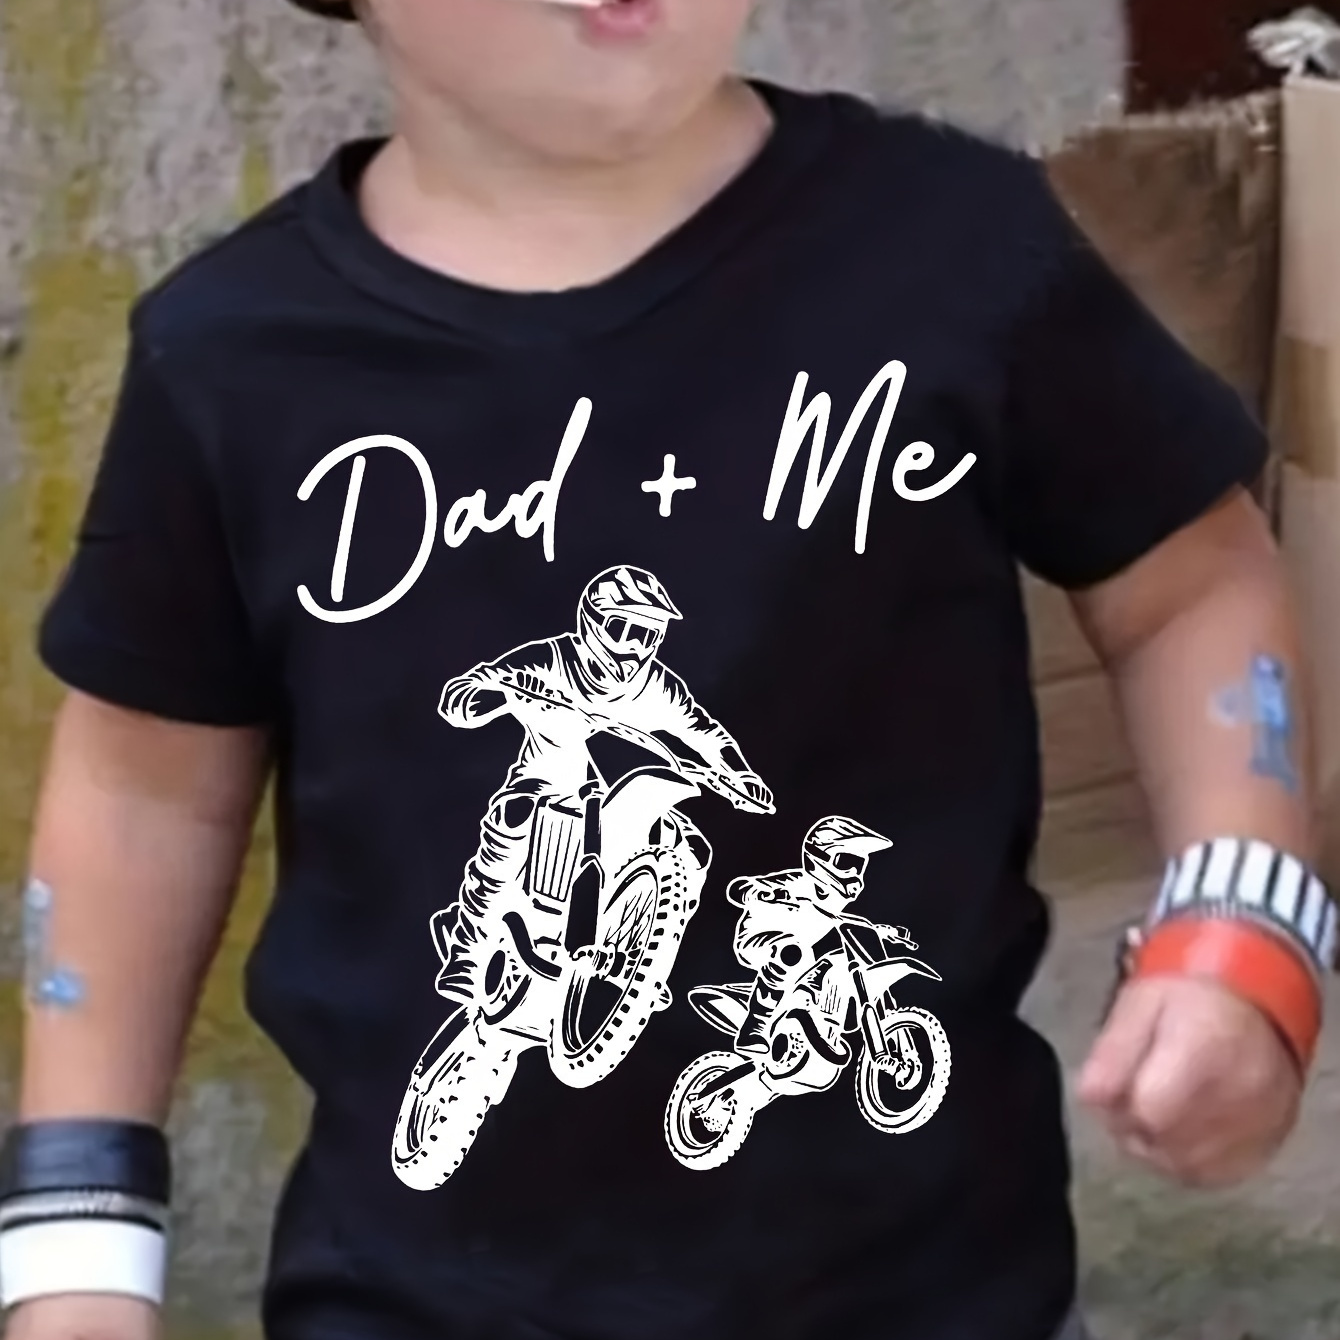 

Stylish Daddy And Me Riding Motorcycle Print Boy's Casual T-shirt, Comfy Crew Neck Tee Top For Summer